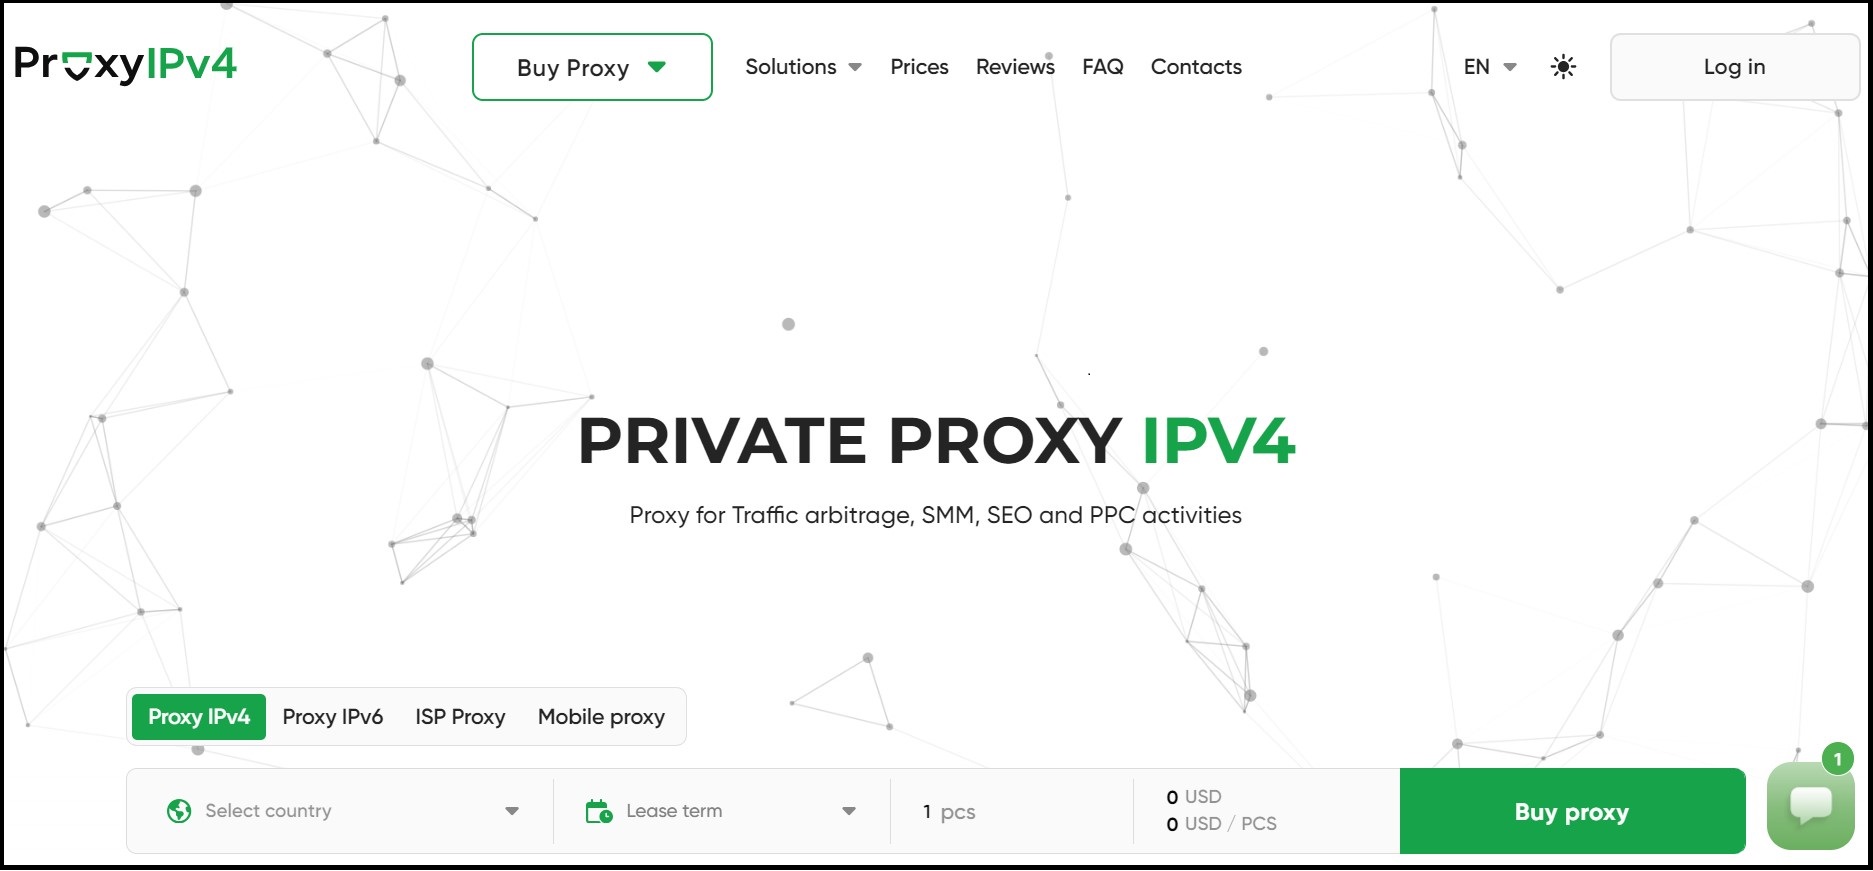 Proxy-IPV4 — Dedicated Proxy With Good Location Coverage